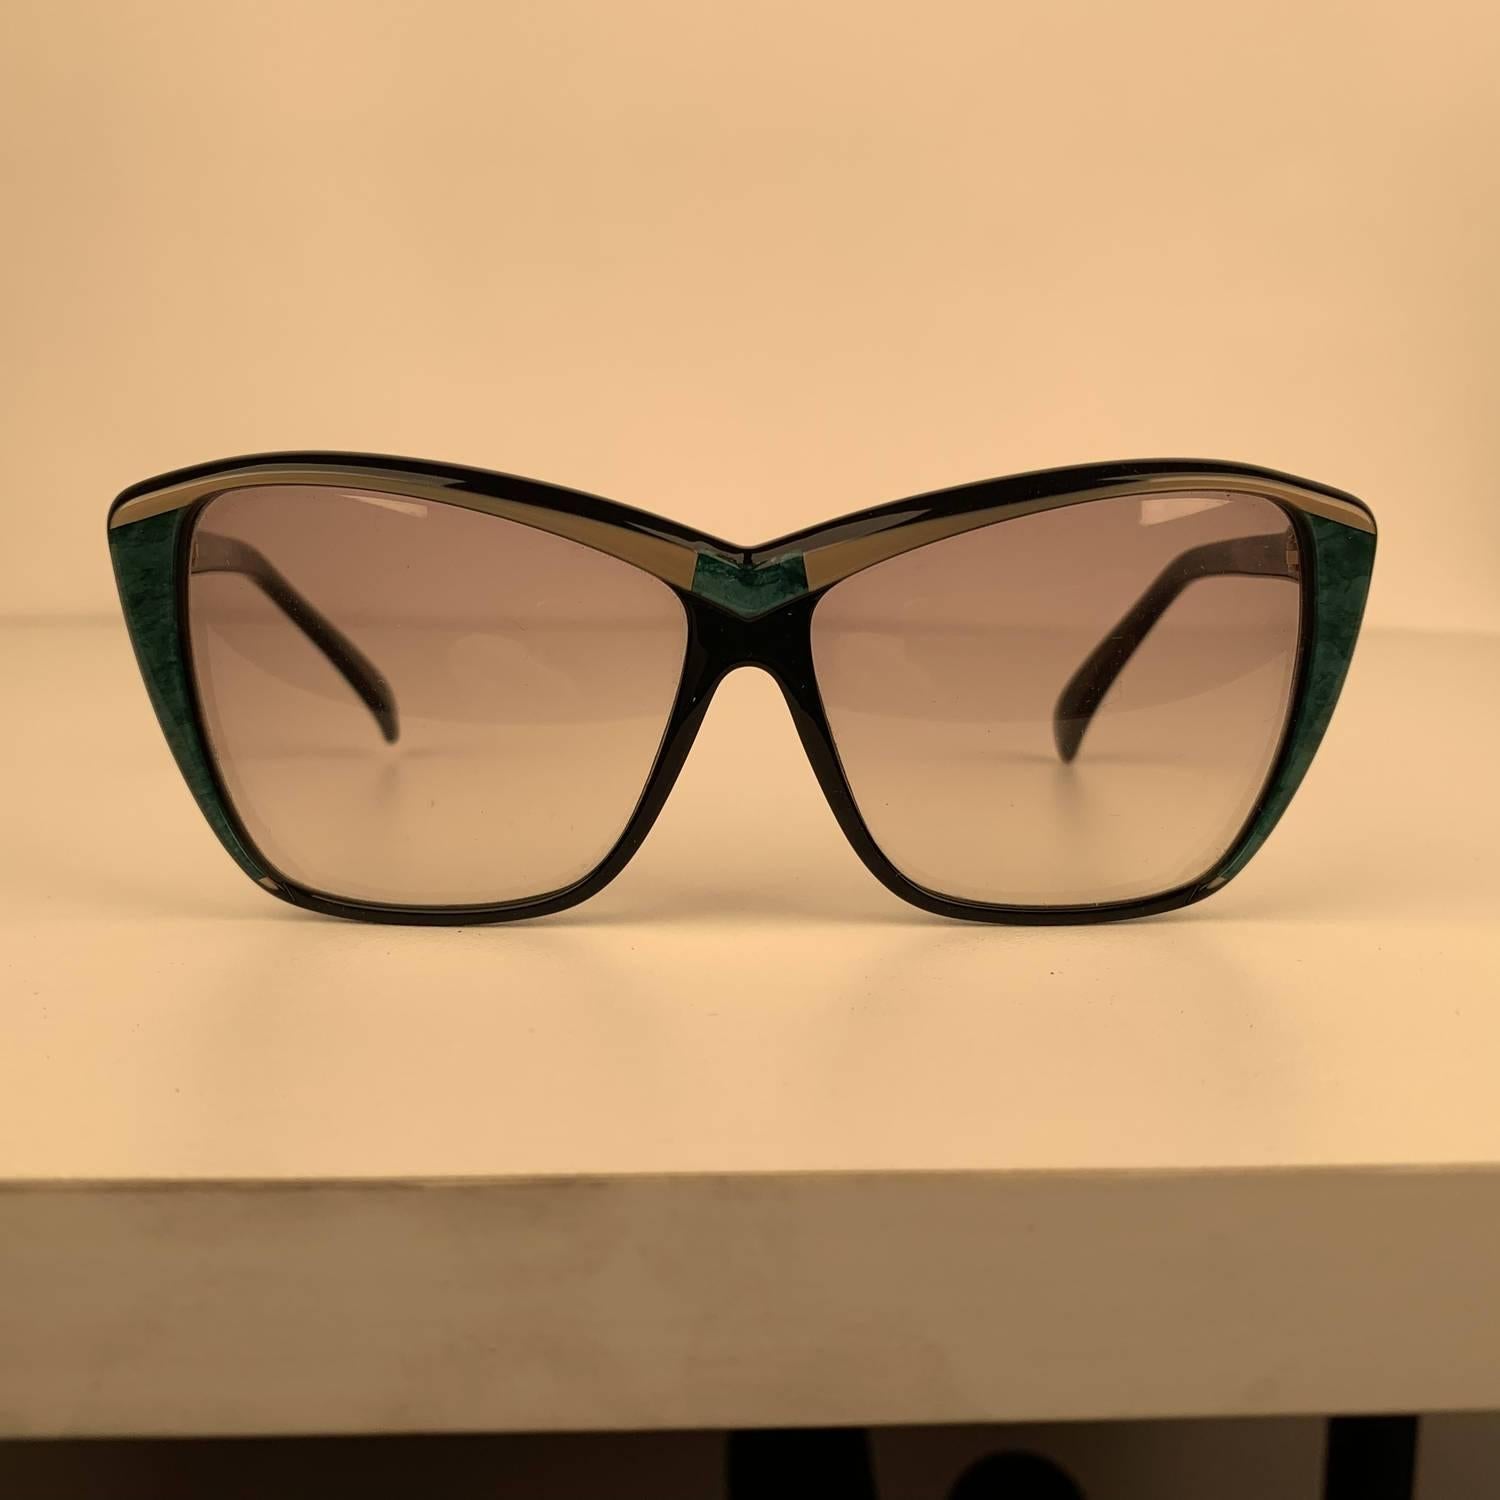 Vintage sunglasses by YVES SAINT LAURENT from the 80s, Mod. 8706 PO 73. Black and green frame with glossy Ivory accents on the front. Hand-Made in France. YSL logos on the arms. New 100% UV protection gradient lenses.


Details

MATERIAL: